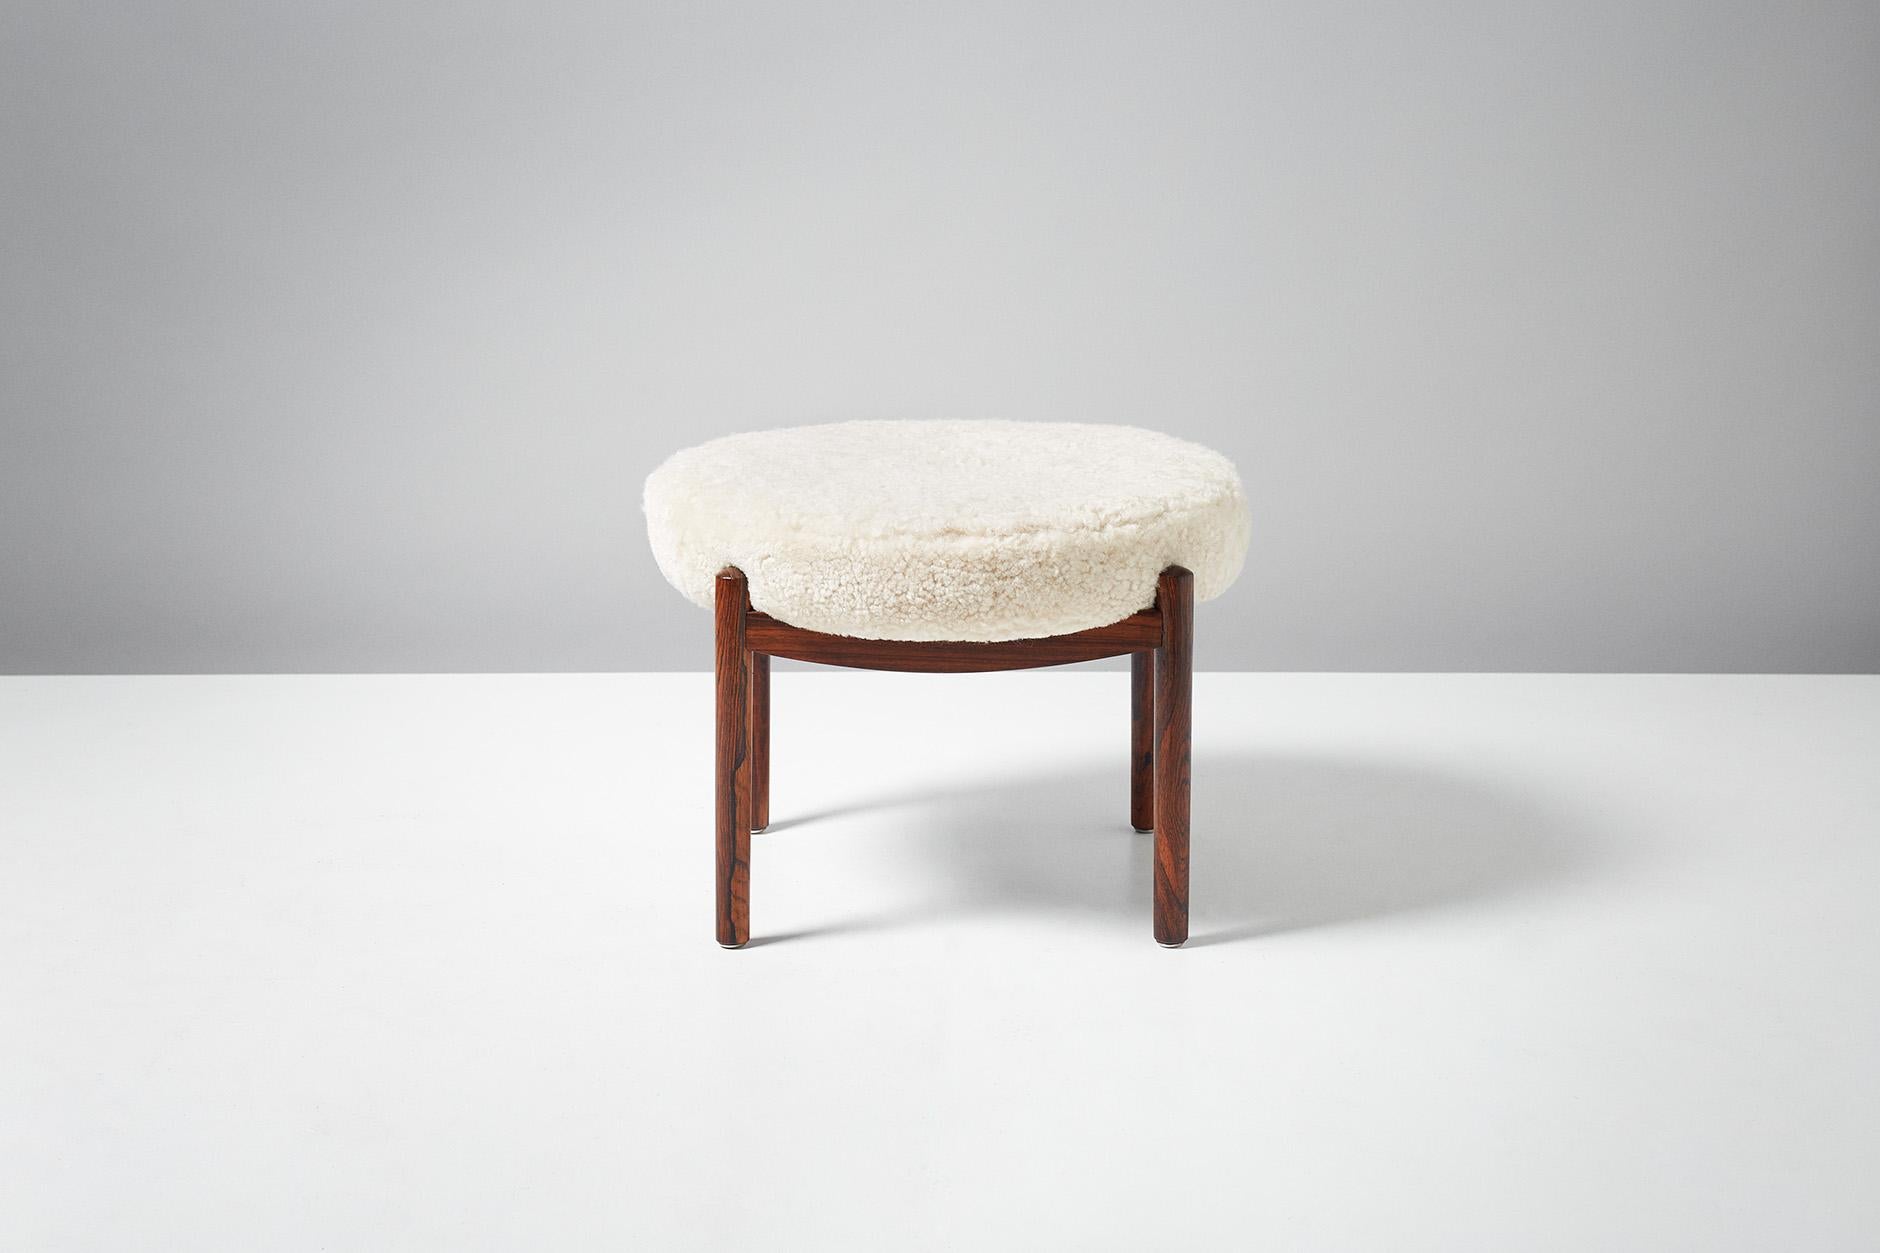 Dagmar design
Round ottoman

Custom-made ottomans developed & produced at our workshops in London using the highest quality materials. 

This ottoman is available to order in a range of different materials and with a choice of 3 wood finishes.